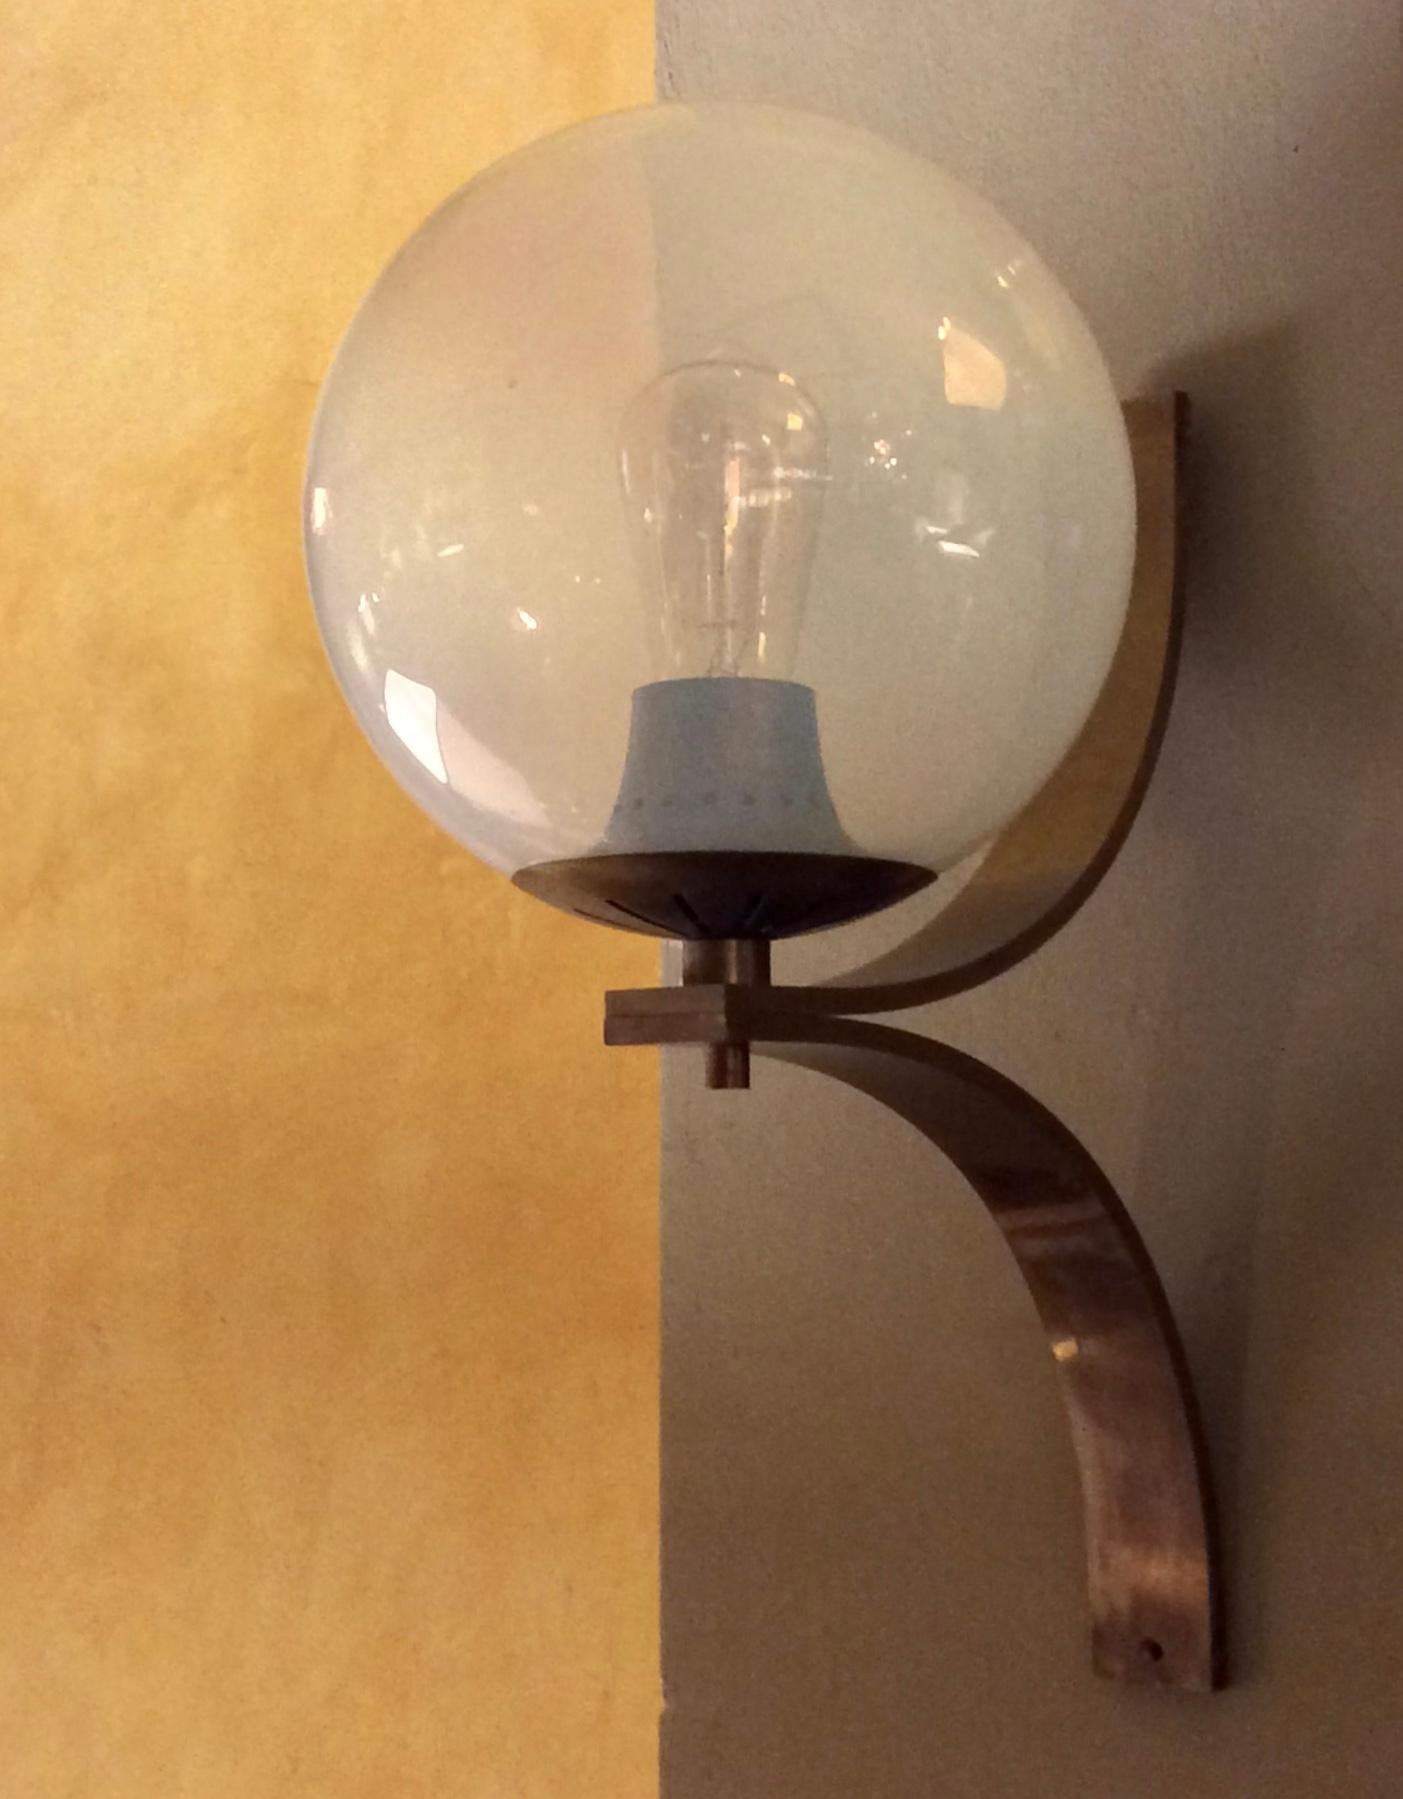 The glass blown boule rests on the brass washer with no anchor system.
E 27 light bulb socket.